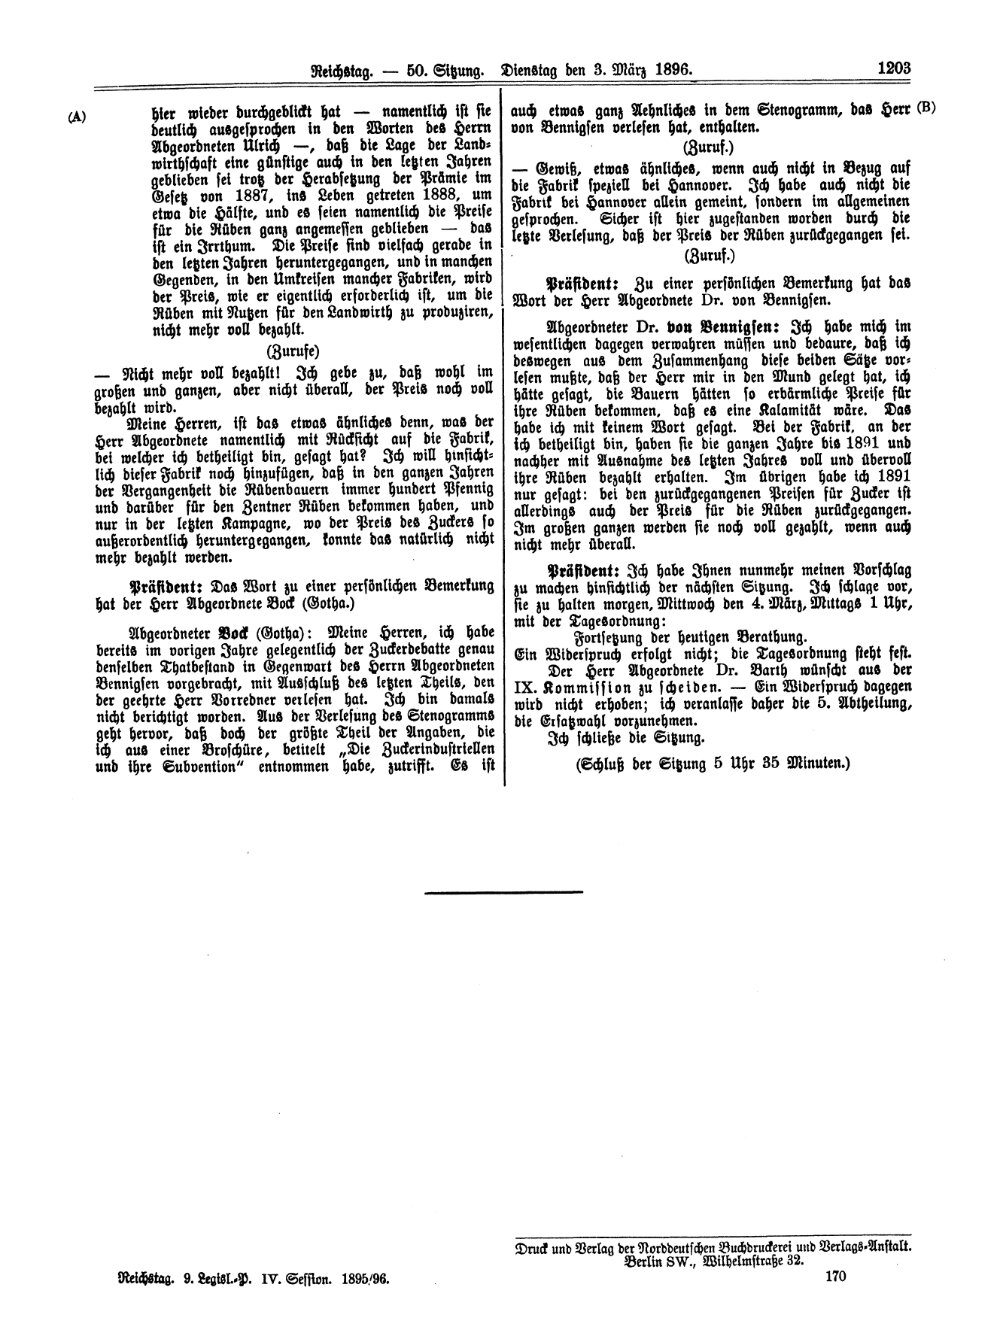 Scan of page 1203